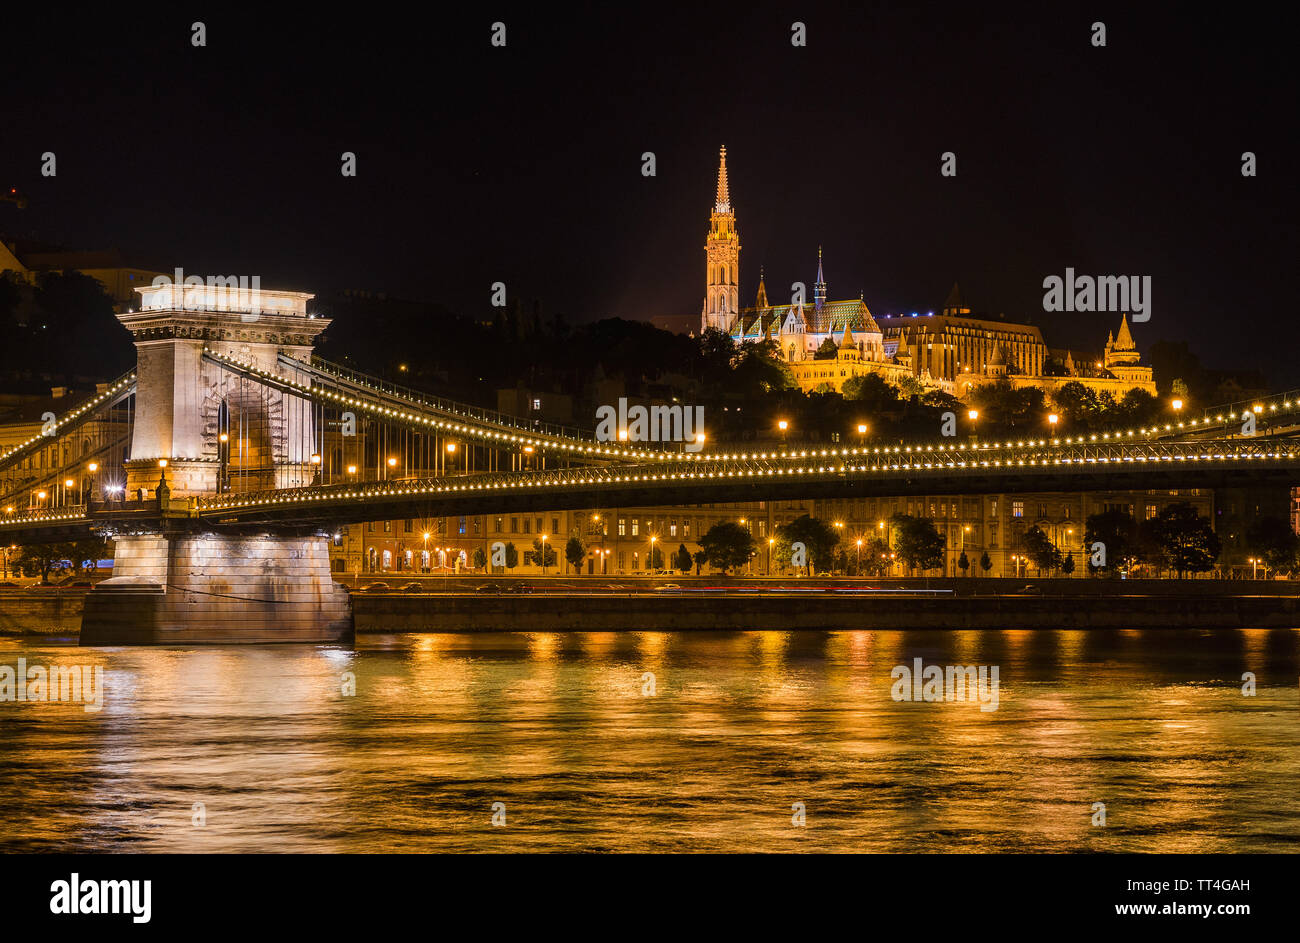 Budapest by night. View of Danube in the center of Budapest with the iconic and monumental Chain Bridge, St Matthias Church and Fisherman's Bastion at Stock Photo